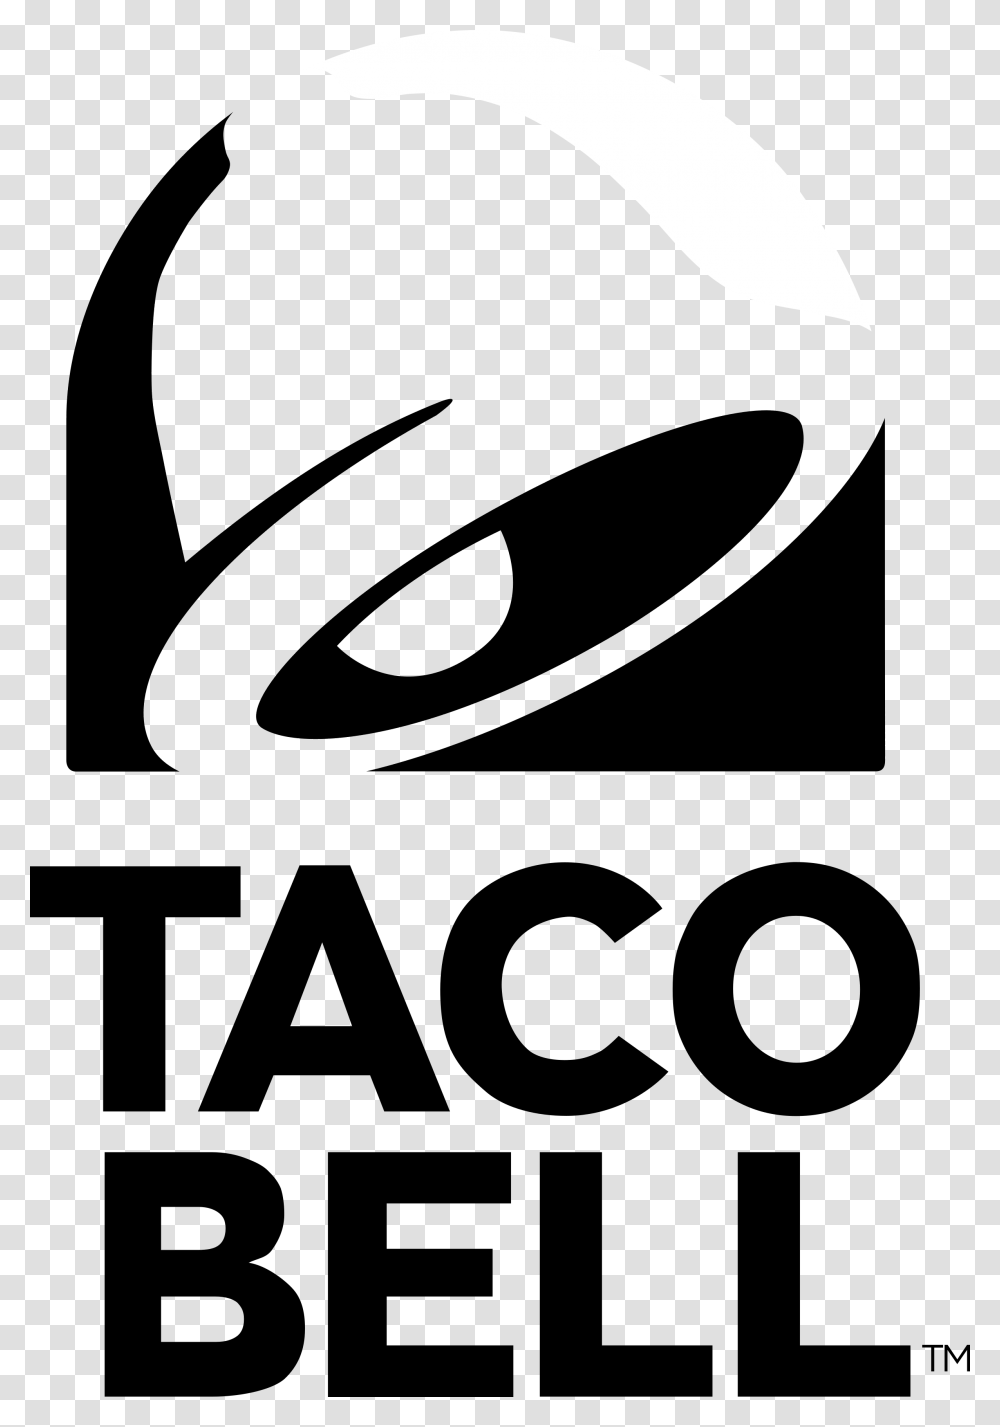 Taco Bell Black And White Amp Clipart Taco Bell Black And White Logo, Outdoors, Astronomy, Outer Space, Nature Transparent Png